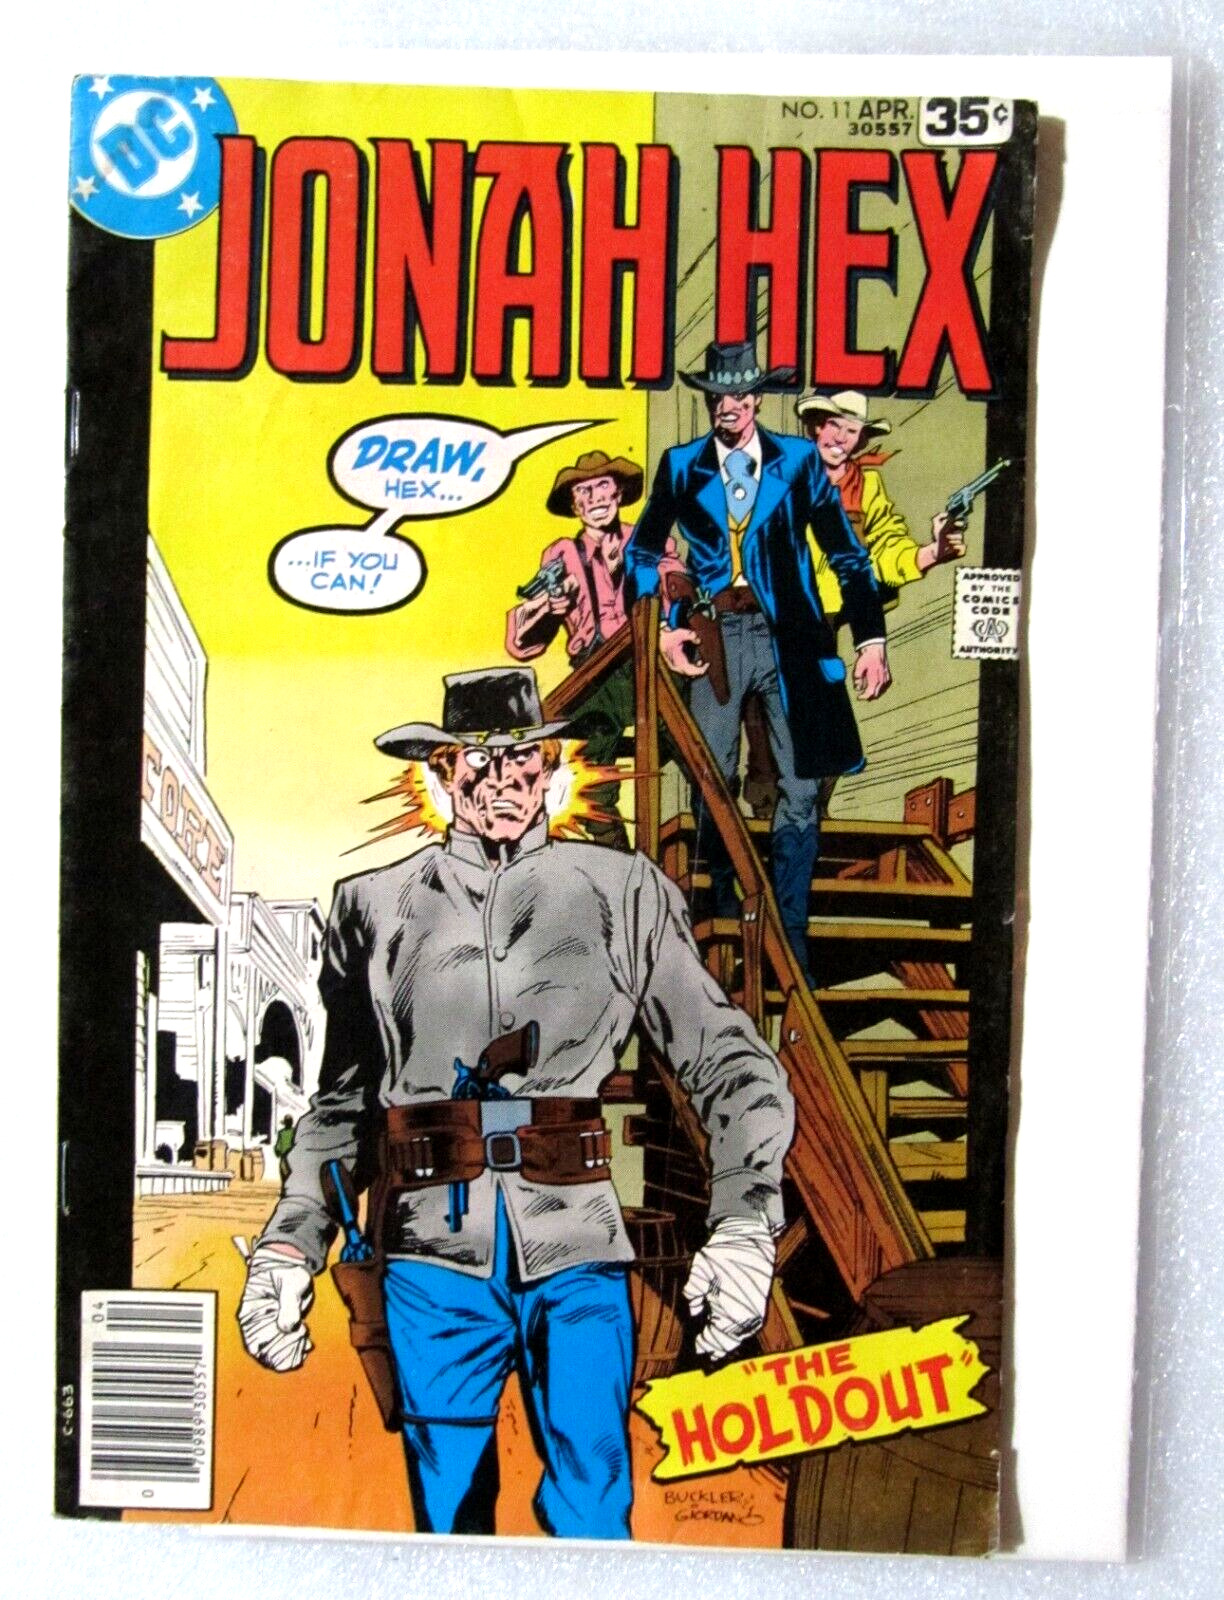 JONAH HEX #11 - 1978 BRONZE AGE DC COMIC - THE HOLDOUT - NEWSSTAND - BOARDED